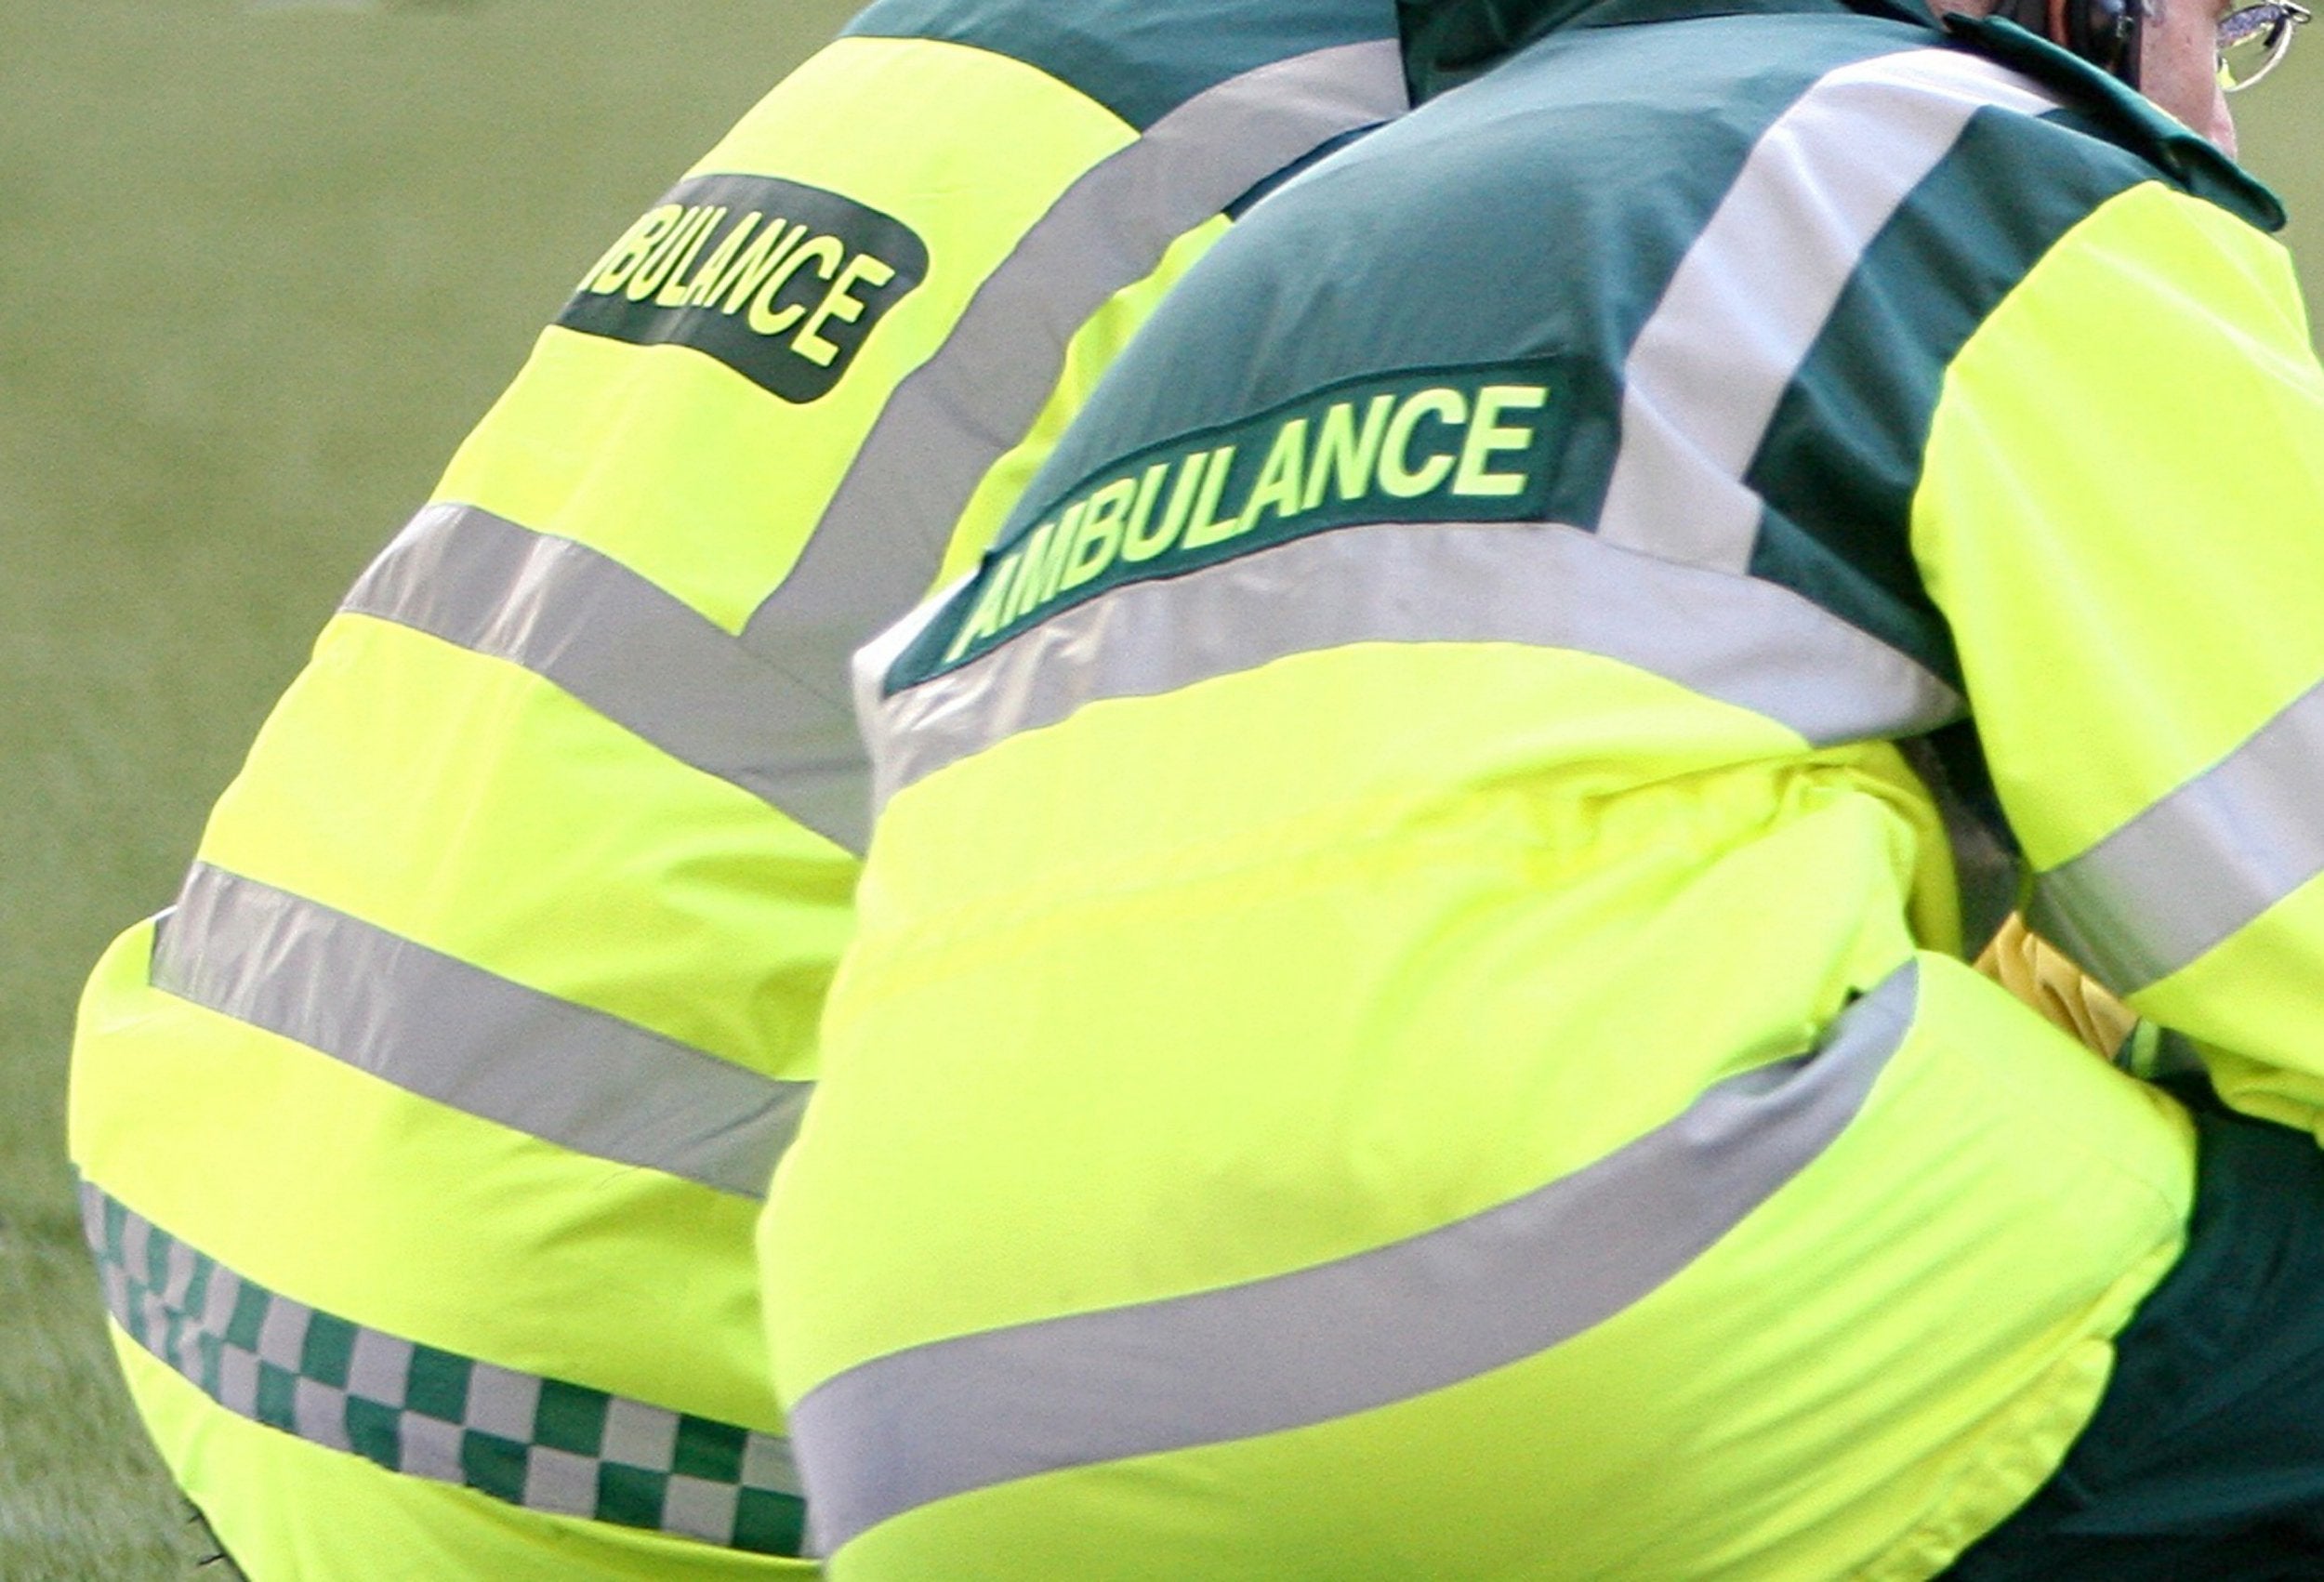 Paramedics to get body cameras following spate of violence against ambulance workers, says Jeremy Hunt